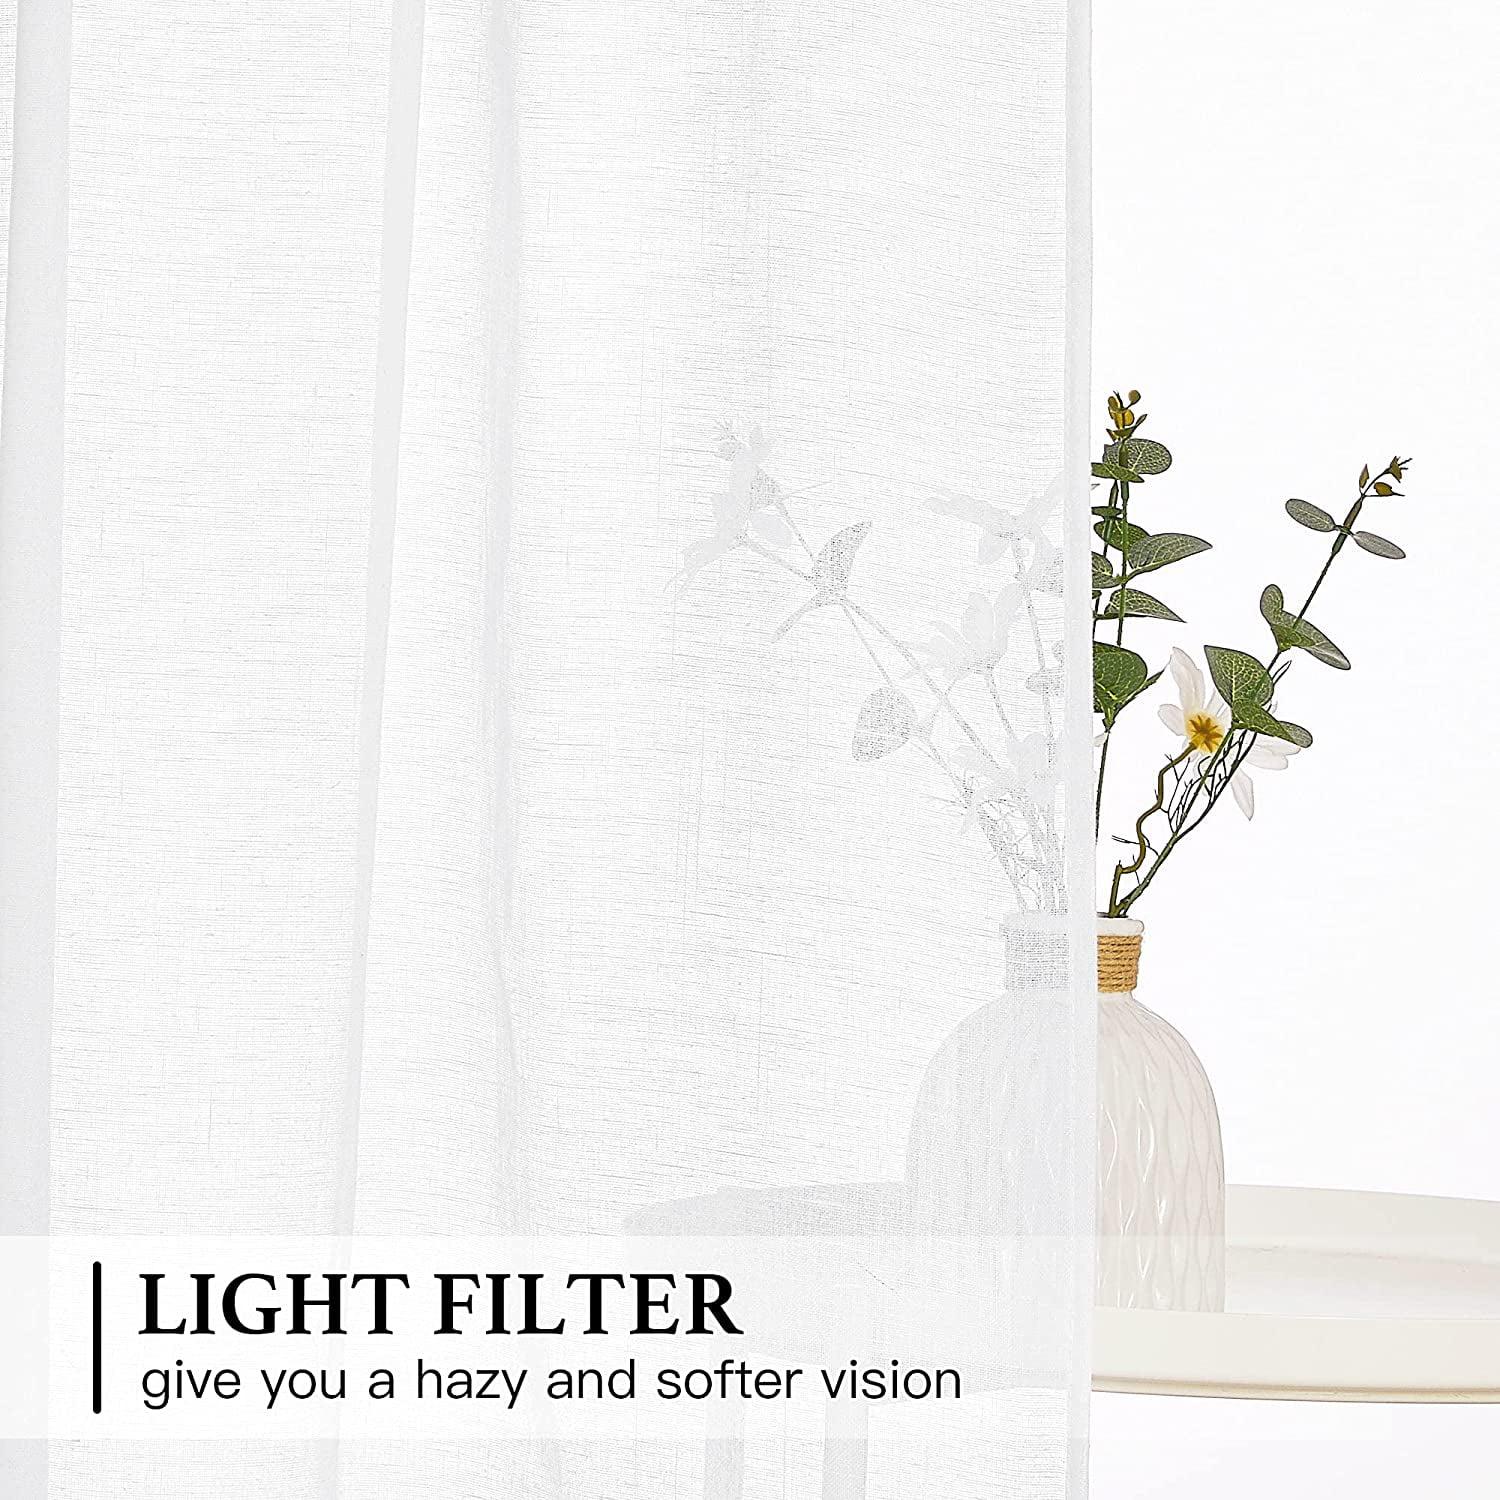 Pure White Bathroom Linen Curtain Textured Adjustable Roman Shade for Kitchen/Camper RV/Living Room 42 Wide x 63 Long NICETOWN Tie Up Curtain for Small Windows 1 Panel